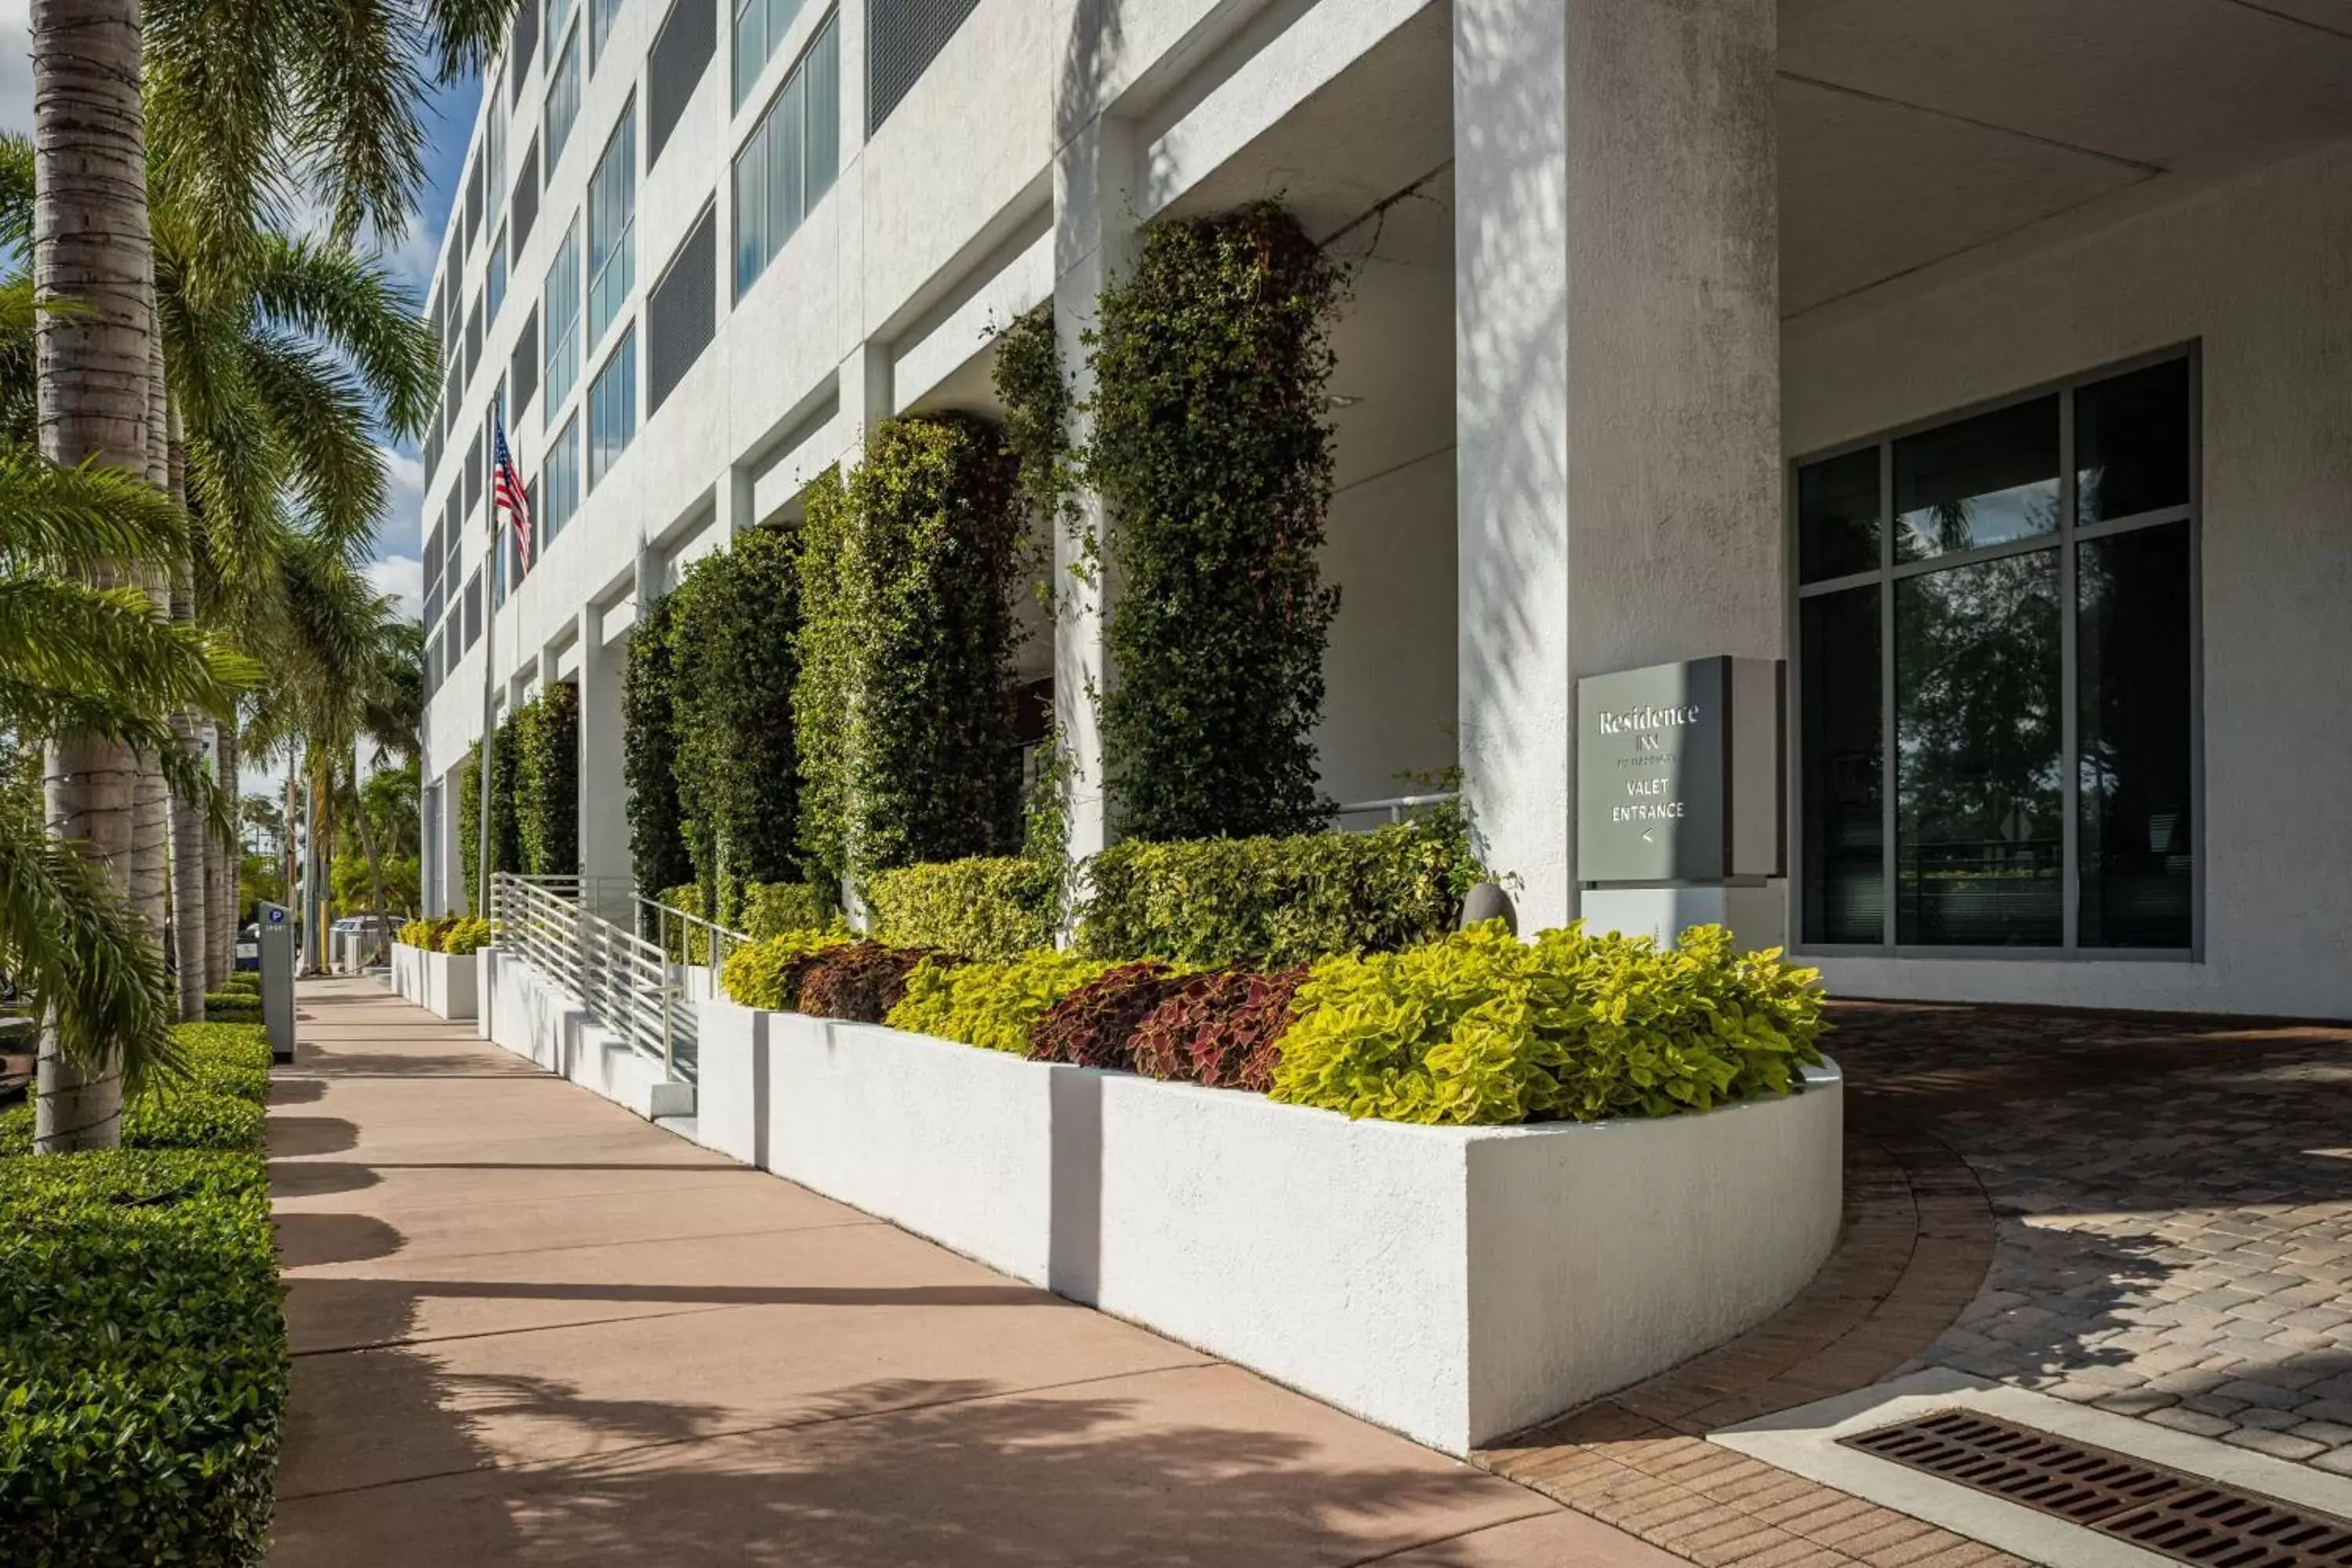 Property building in Residence Inn by Marriott Fort Lauderdale Intracoastal